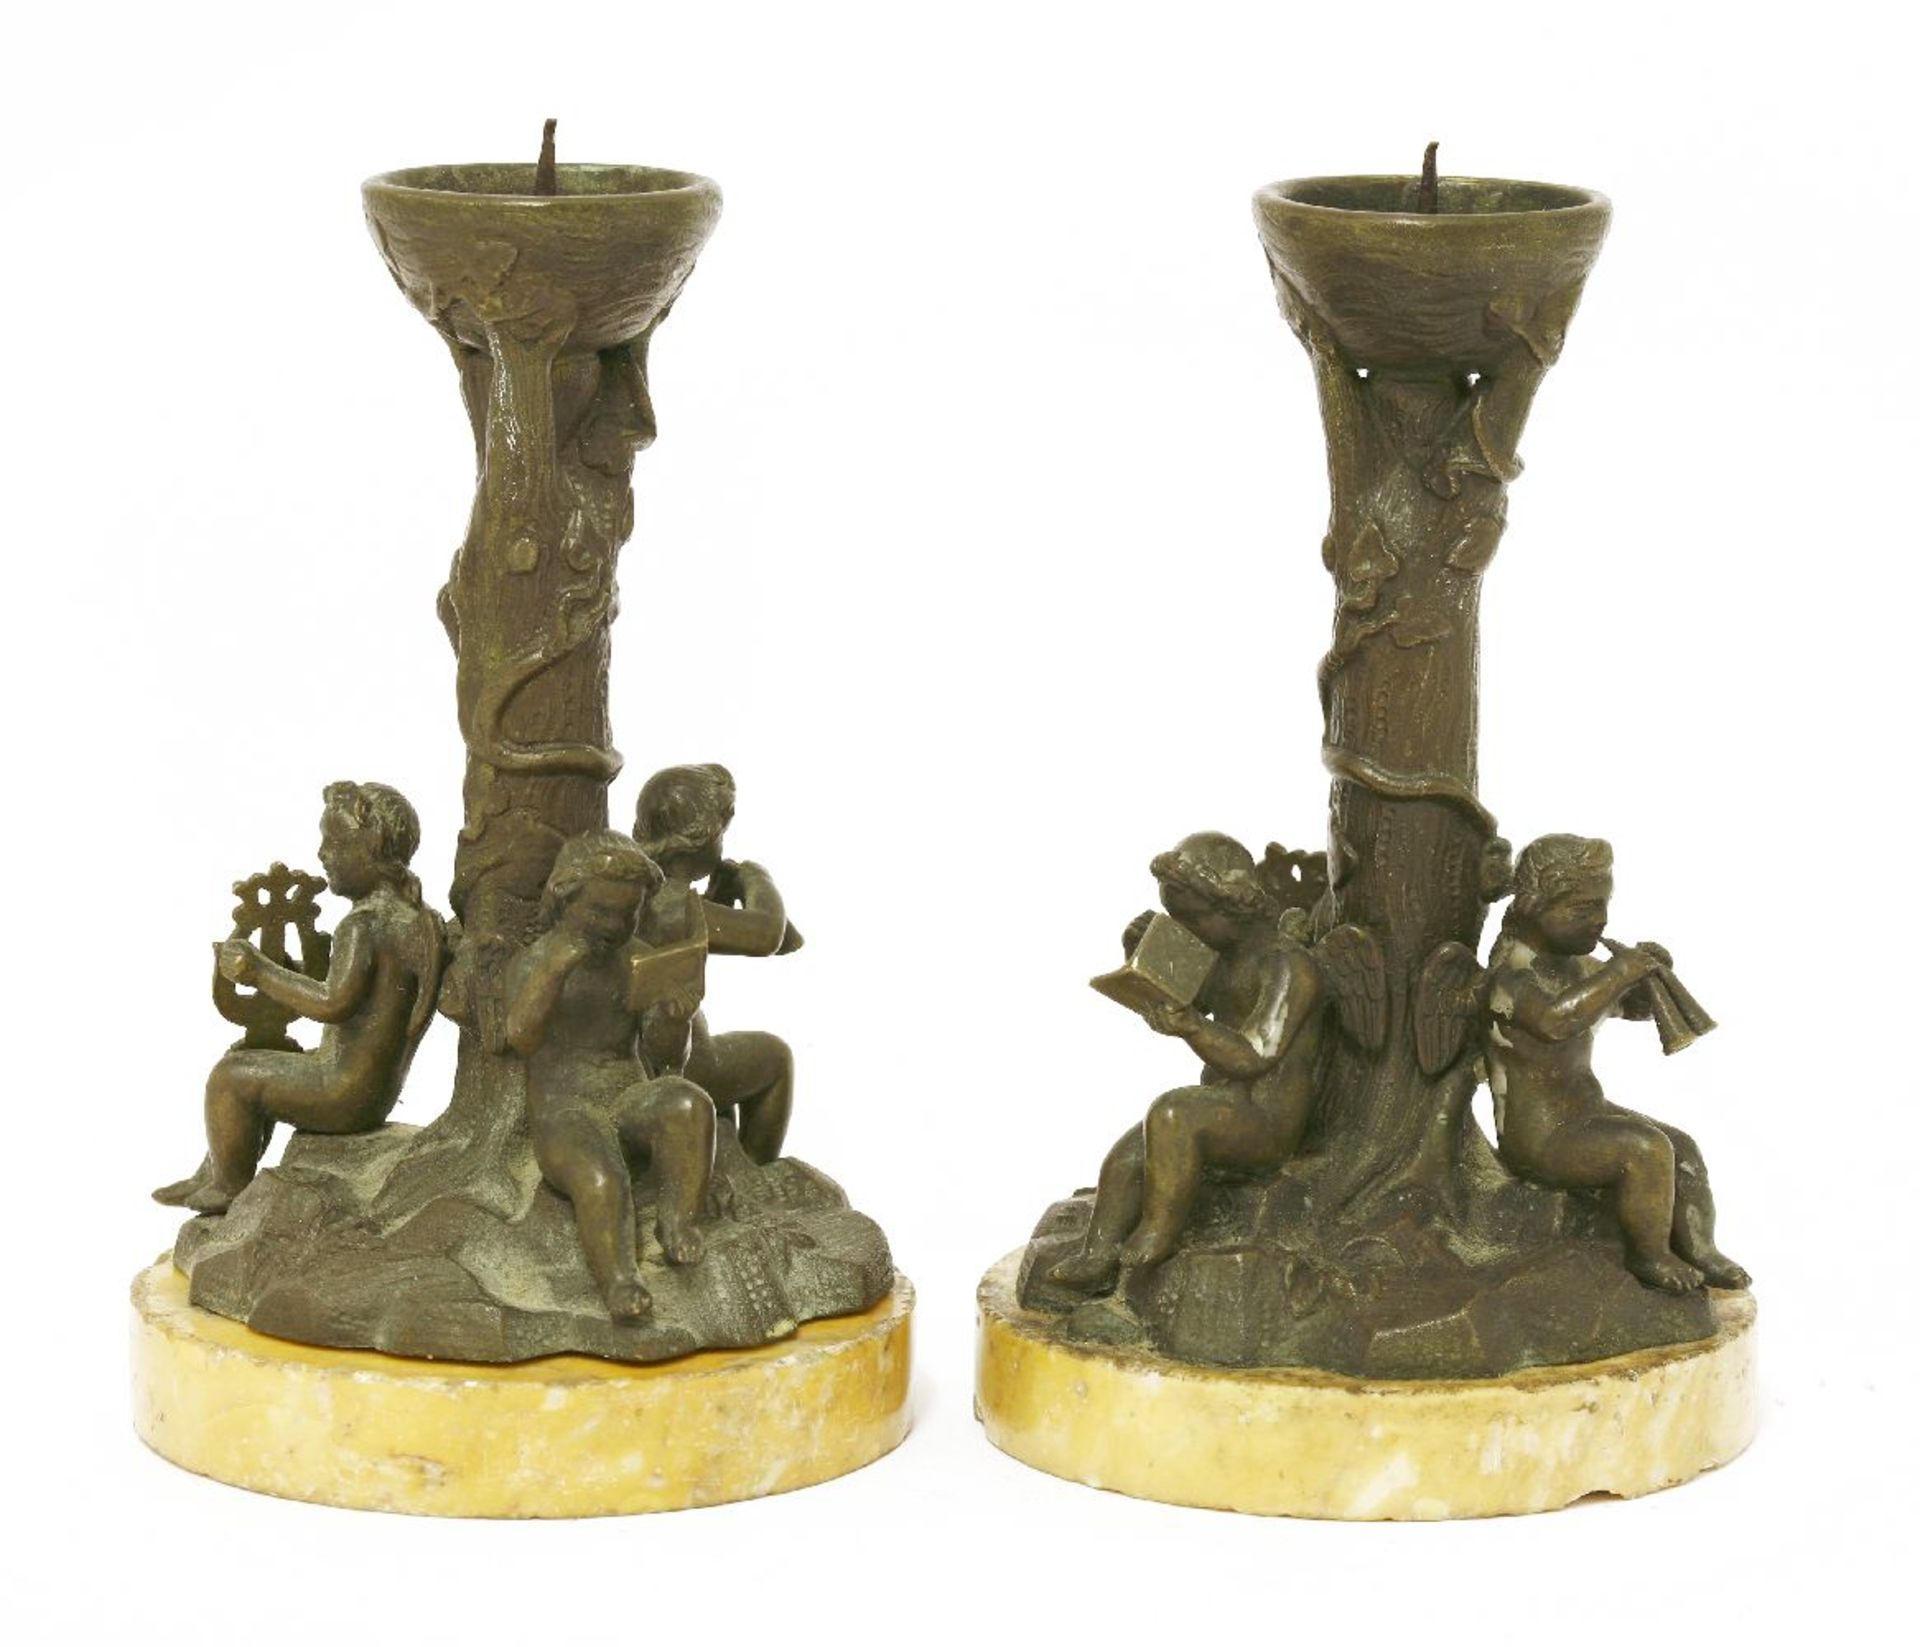 A pair of bronze candlesticks,late 19th century, each of pricket candlestick form, with a rusticated